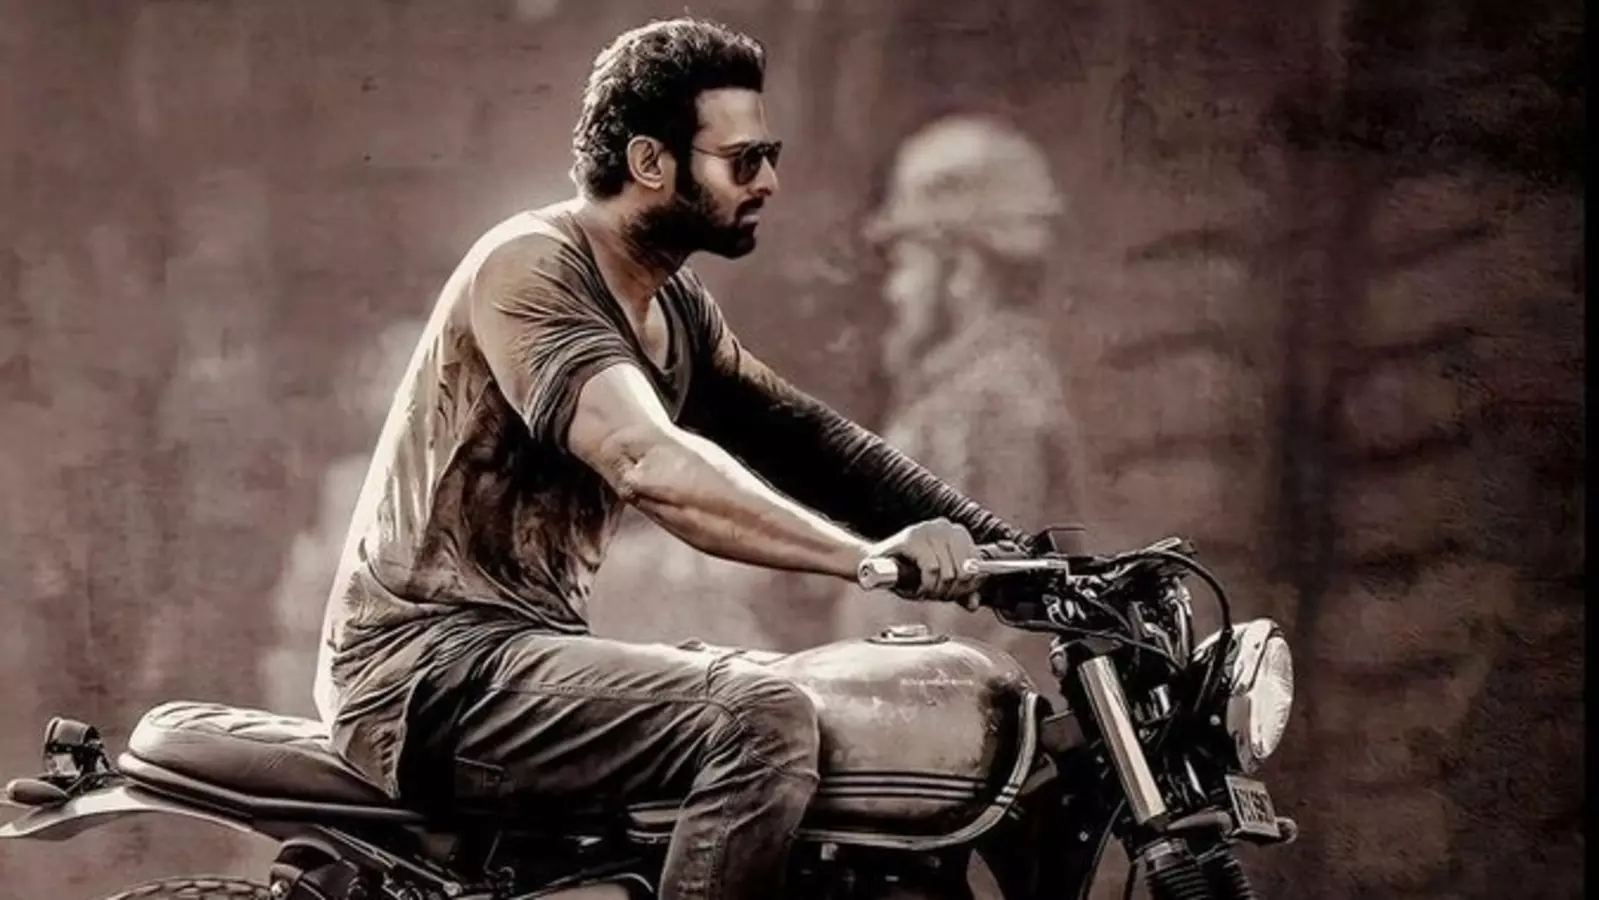 Interesting chance to win Bike used by Prabhas in Salaar